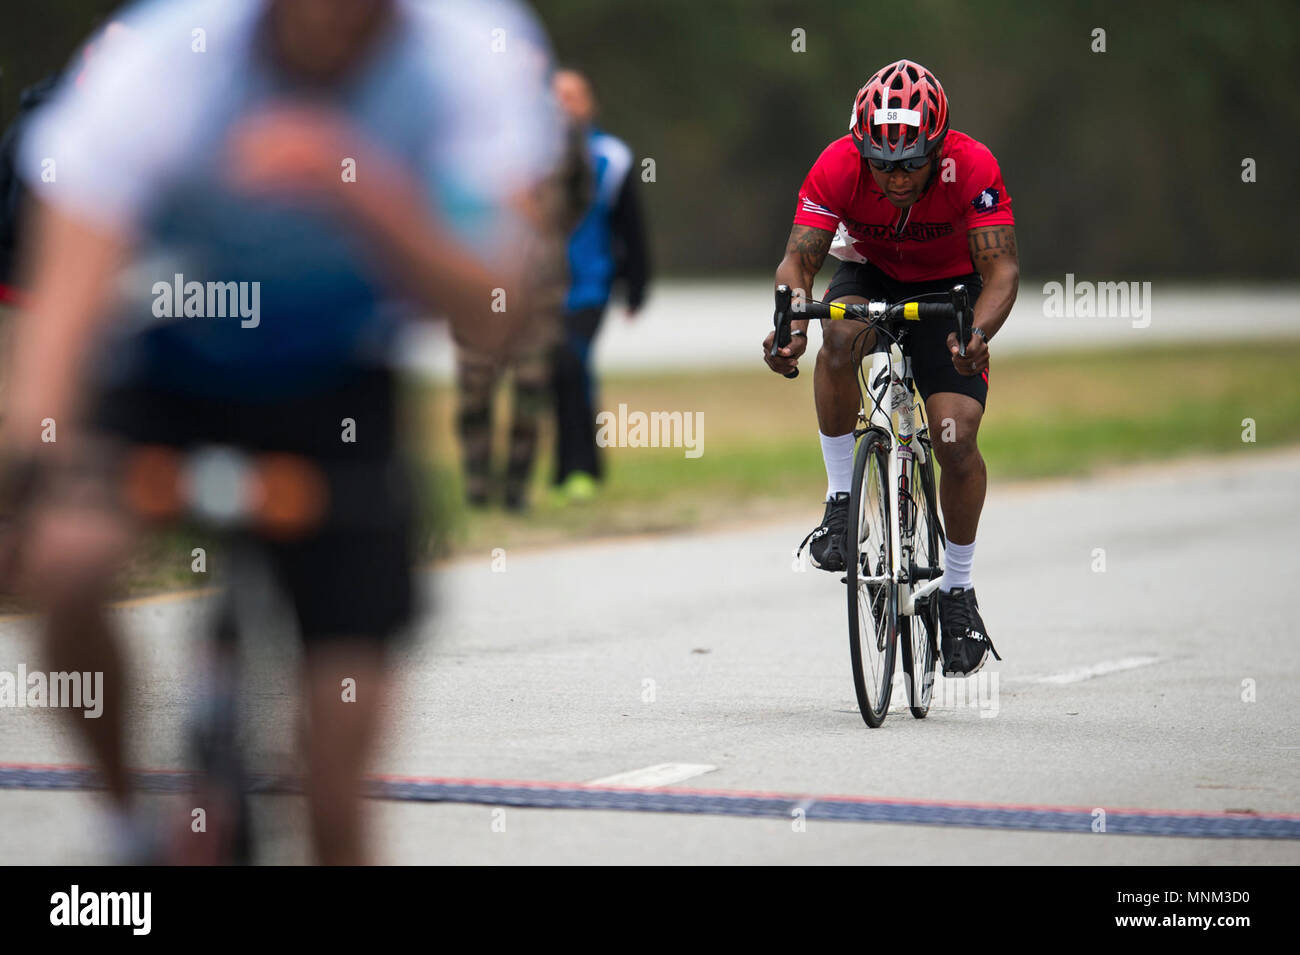 A U.S. Marine crosses the finish line during the 2018 Marine Corps Trials cycling competition at Marine Corps Base Camp Lejeune, N.C., March 18, 2018. The Marine Corps Trials promotes recovery and rehabilitation through adaptive sport participation and develops camaraderie among recovering service members (RSMs) and veterans. It is an opportunity for RSMs to demonstrate their achievements and serves as the primary venue to select Marine Corps participants for the DoD Warrior Games. Stock Photo